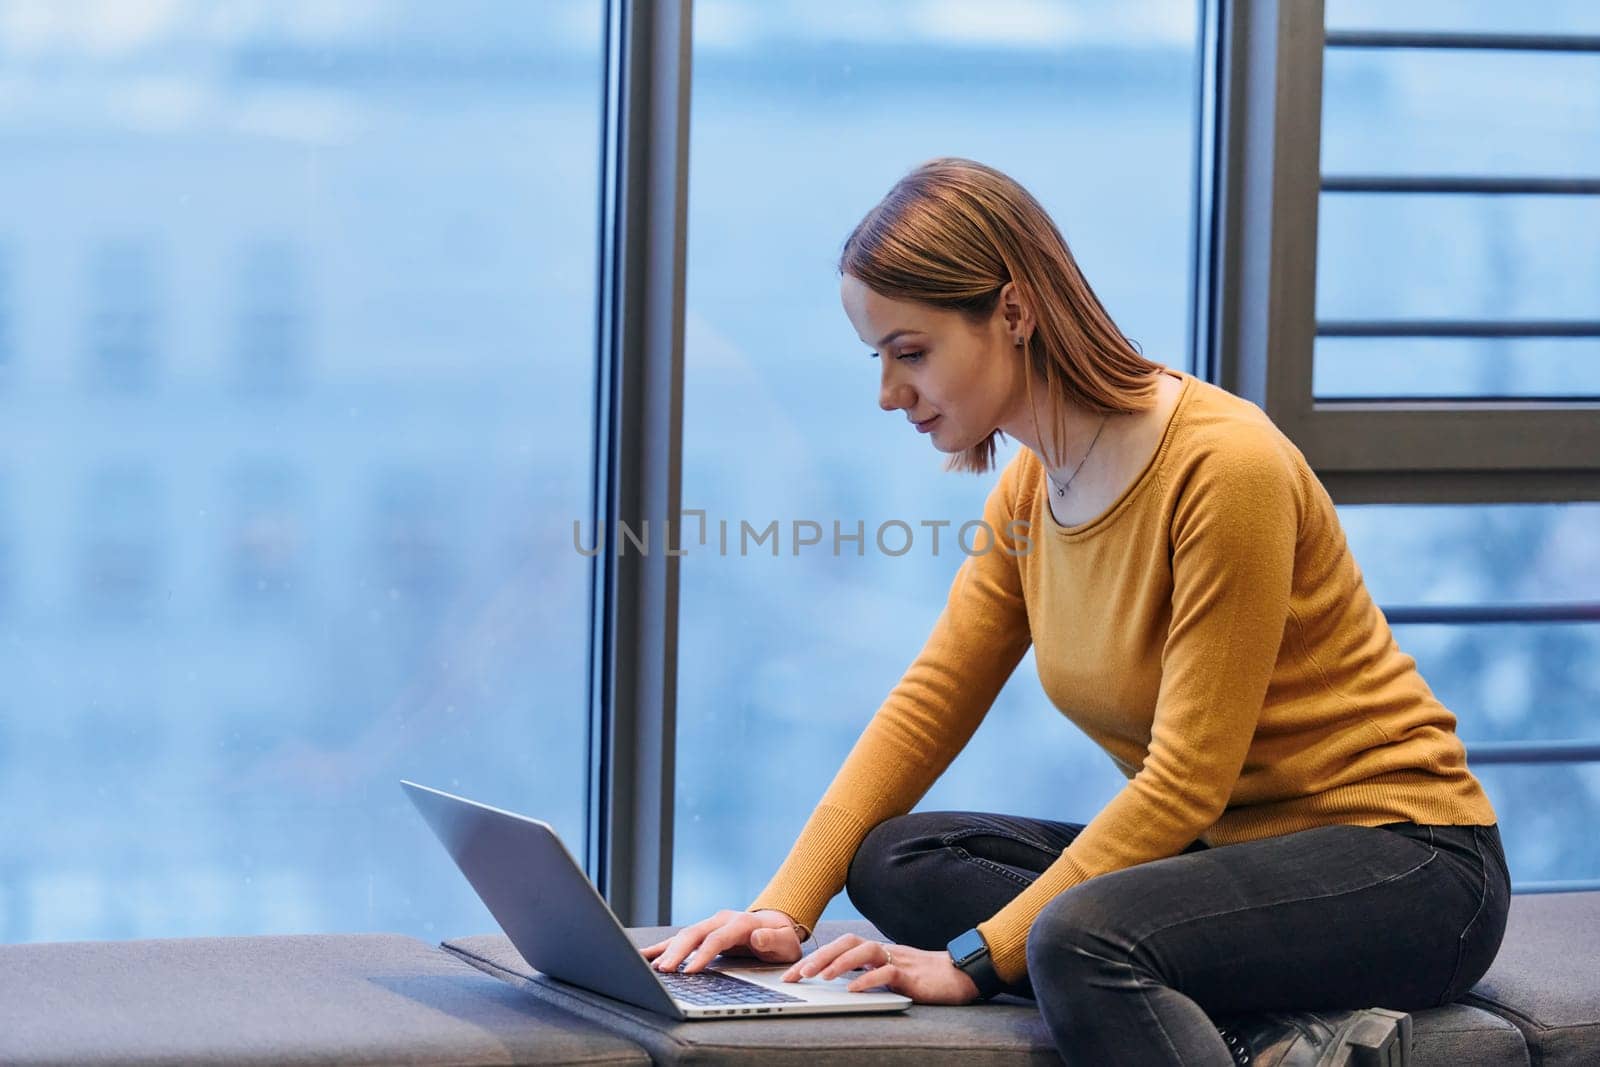 A businesswoman utilizes her laptop while seated by the window of a large corporate building, offering a picturesque view of the city skyline as her backdrop. by dotshock